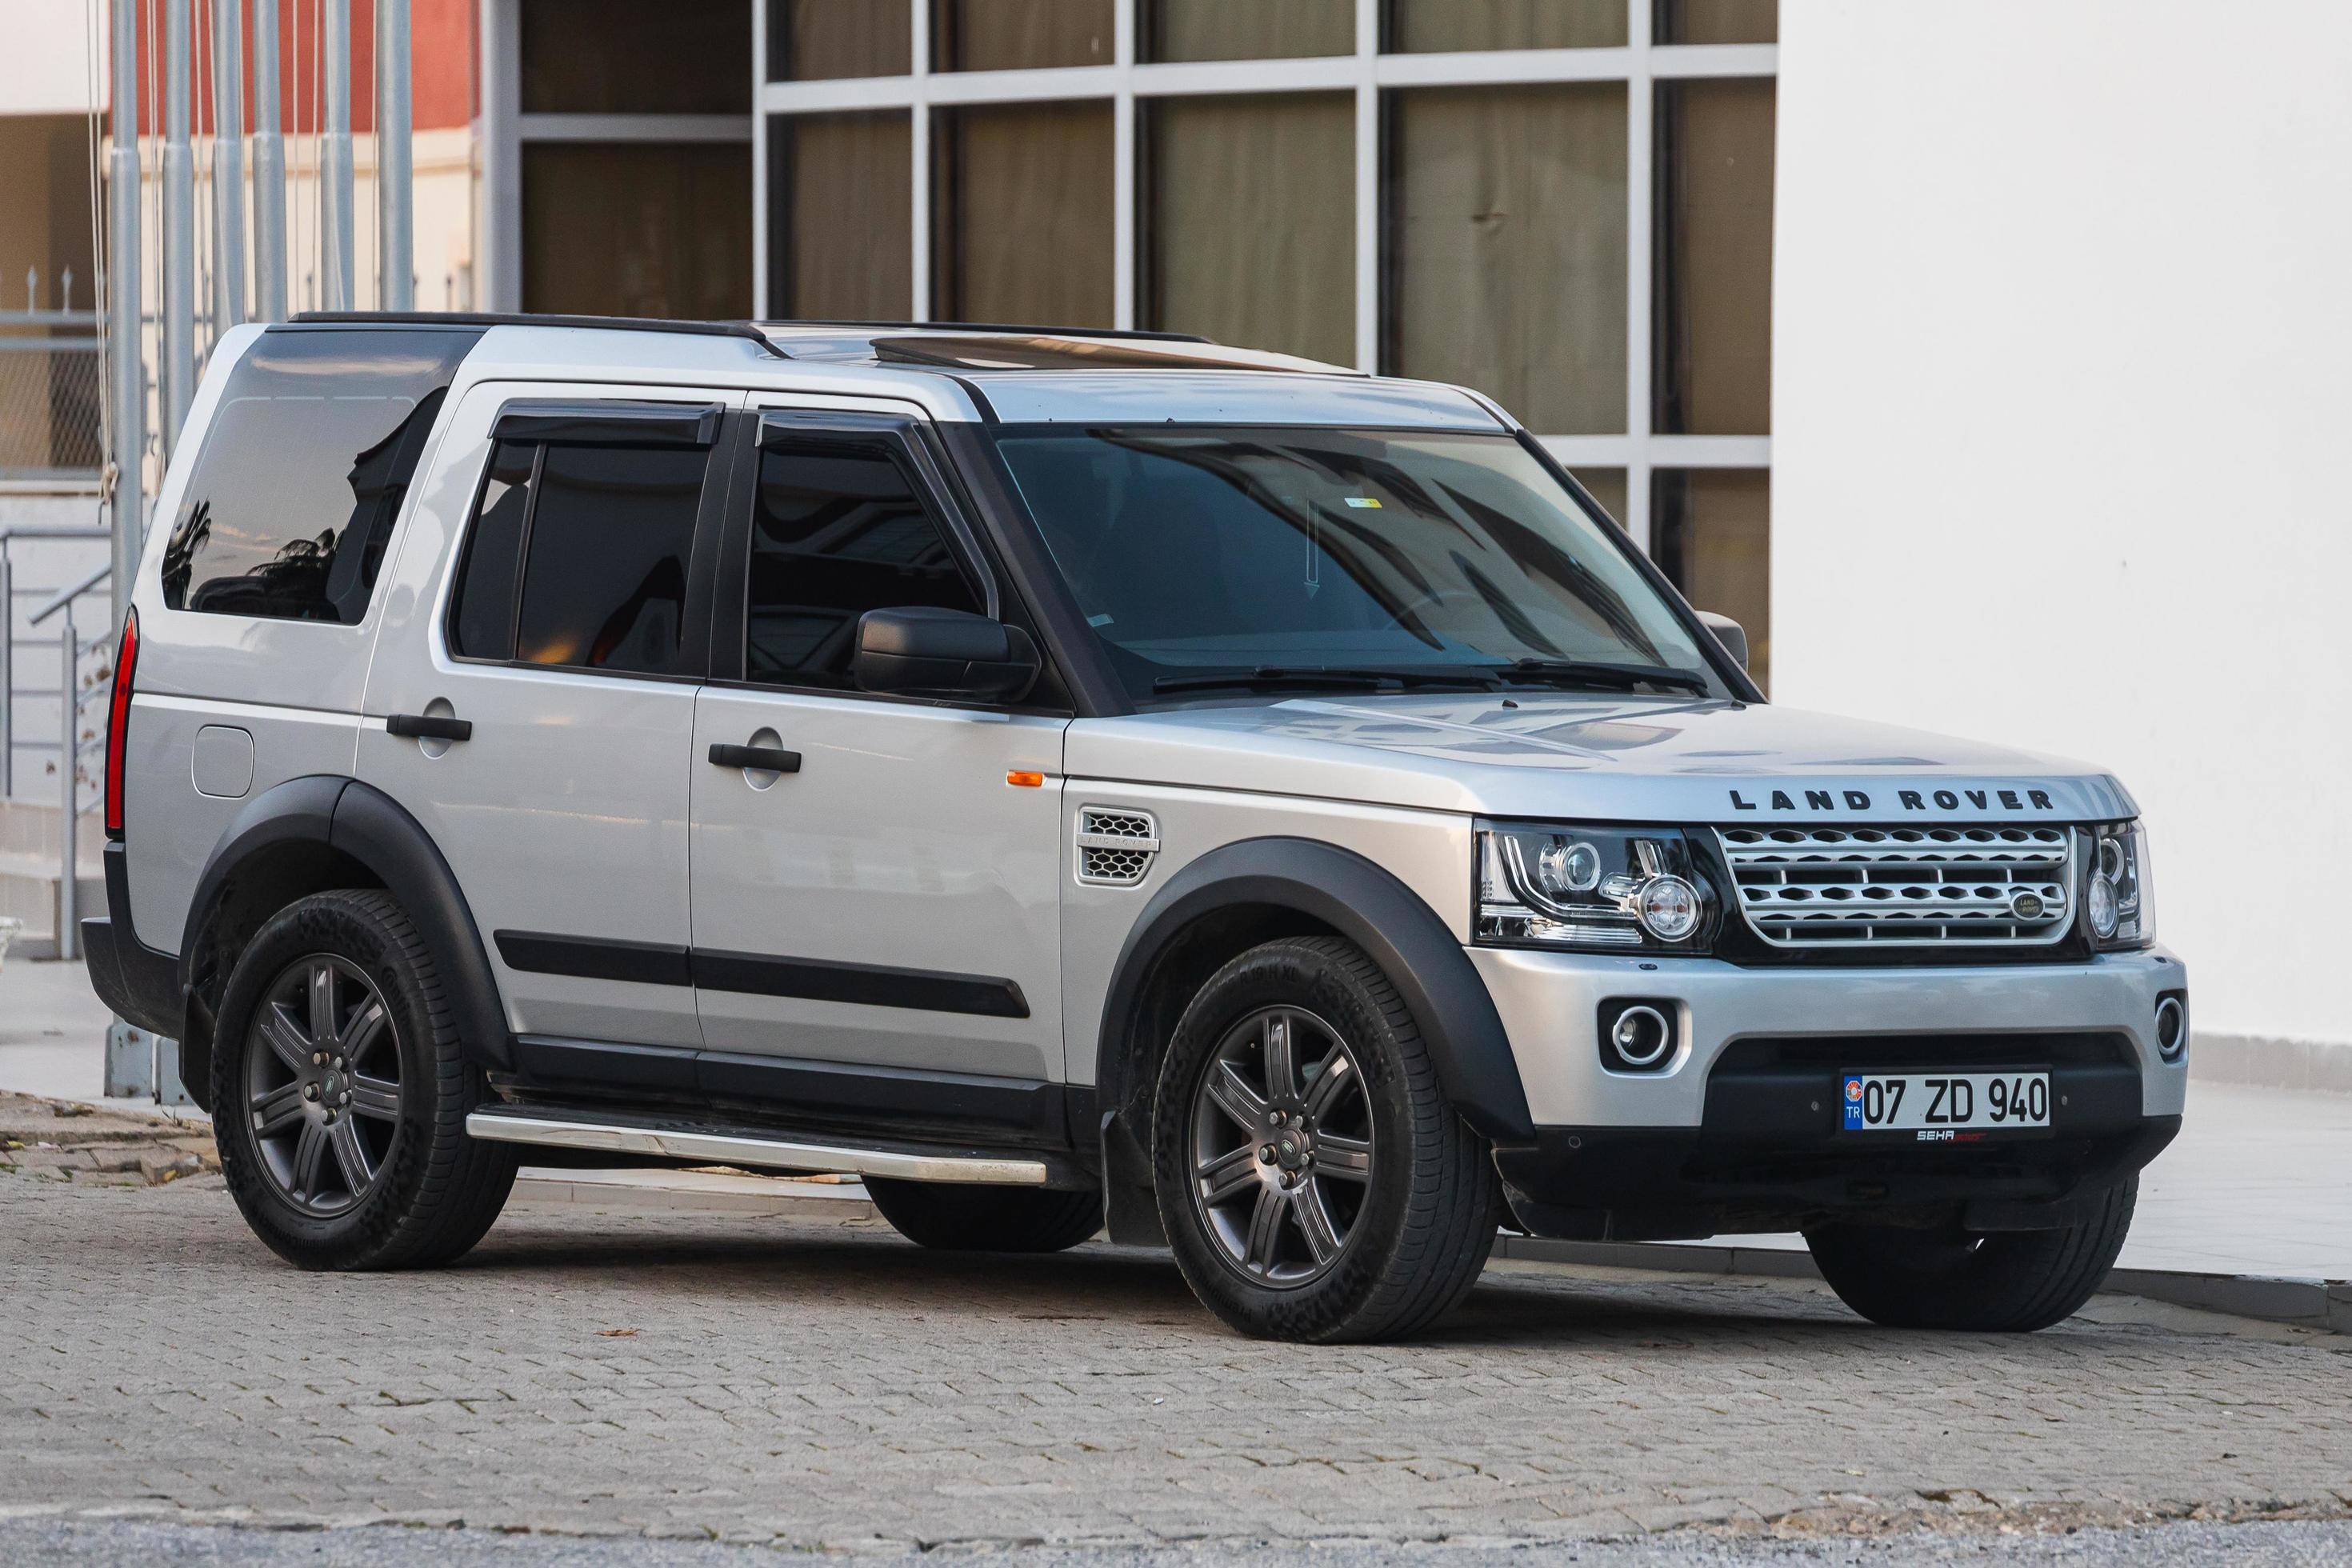 Gang Medaille gips Side Turkey February 18 2022 silver Land Rover Discovery 4 is parking on  the street on a summer day 8729360 Stock Photo at Vecteezy